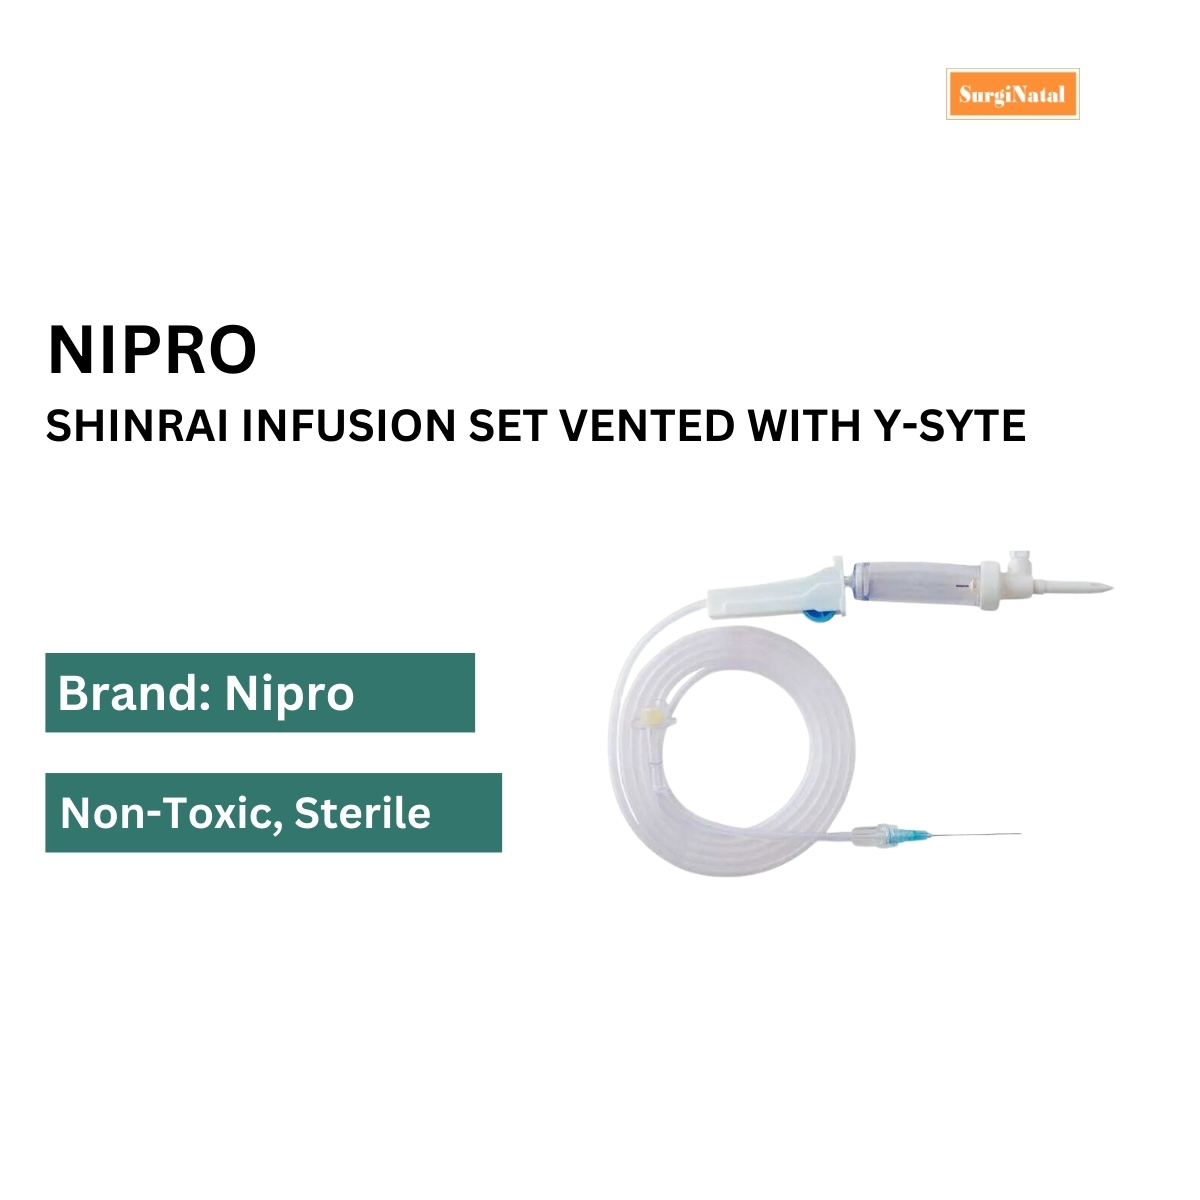 nipro shinrai infusion set vented with y-syte